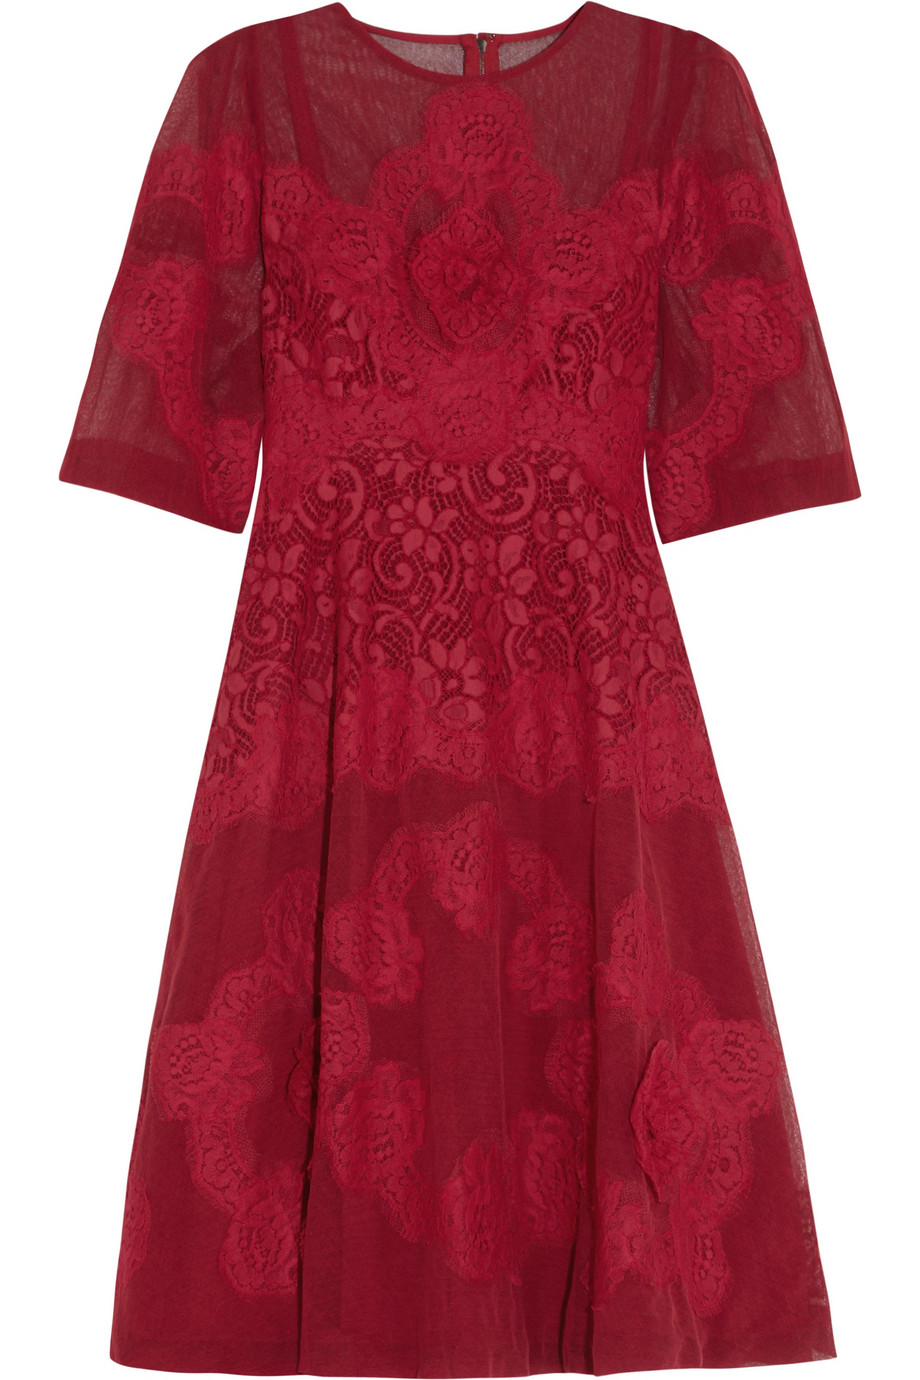 Lyst - Dolce & Gabbana Appliquéd Tulle and Lace Dress in Red